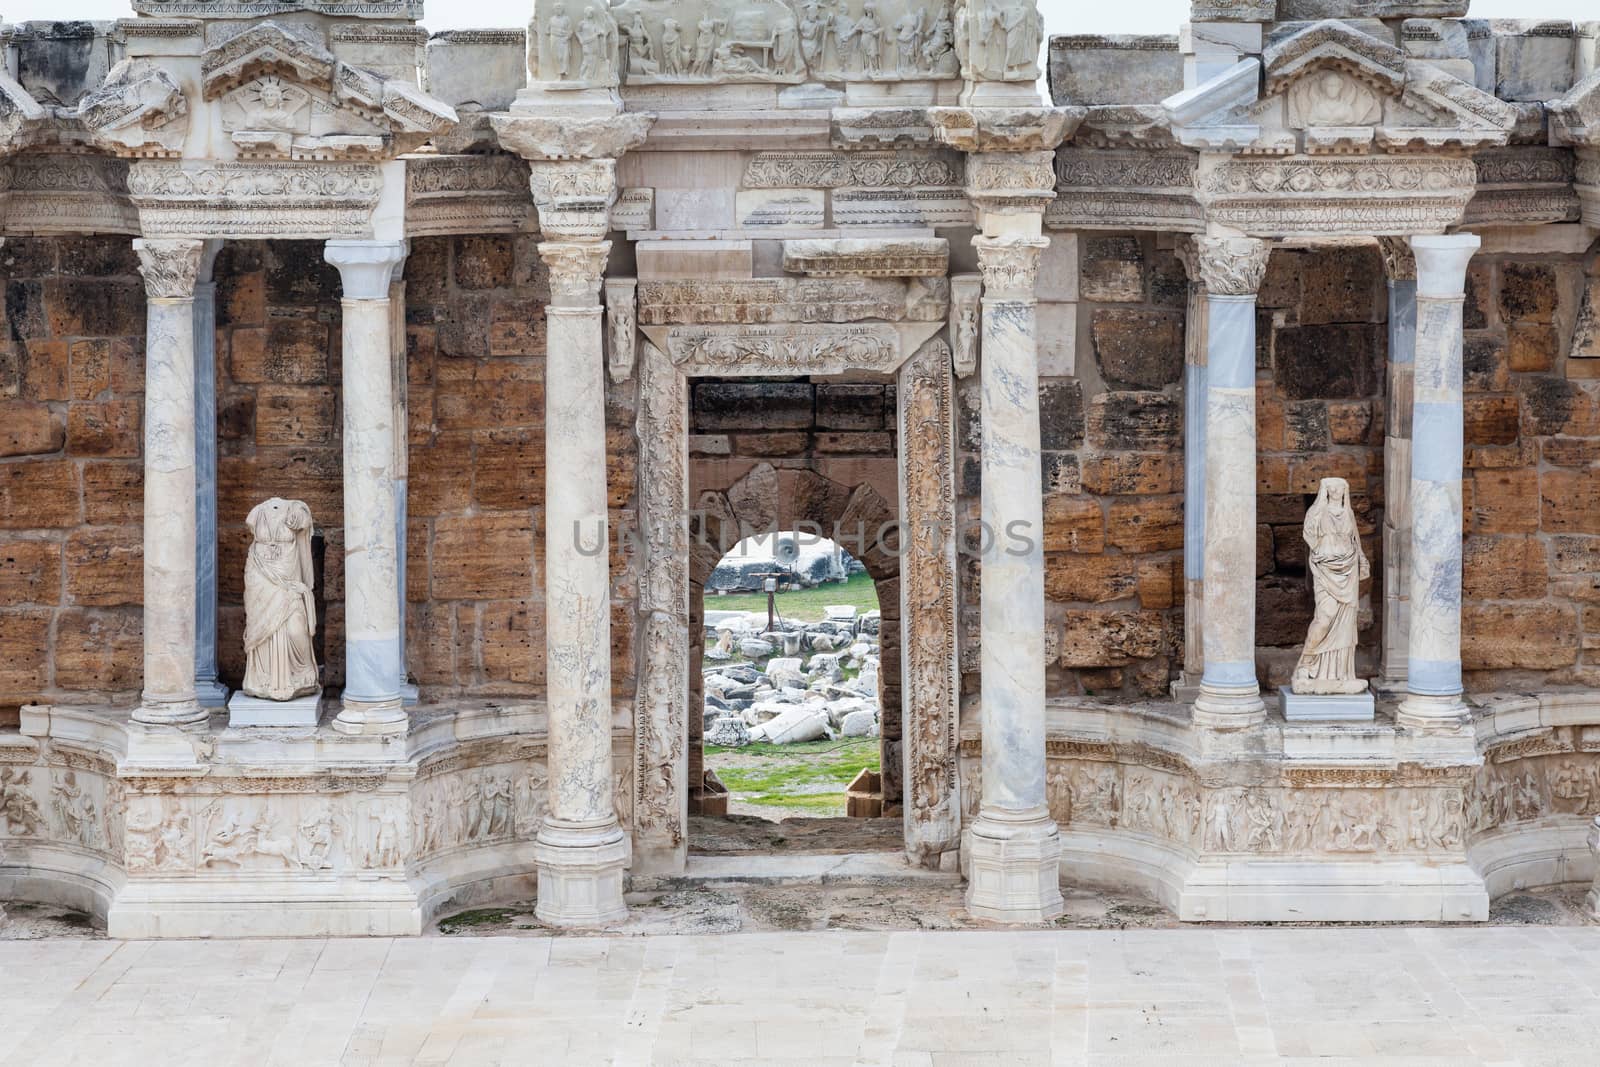 The stage buildings of Hierapolis theatre were constructed in the 2nd century AD and the site is now a UNESCO World Heritage Site.